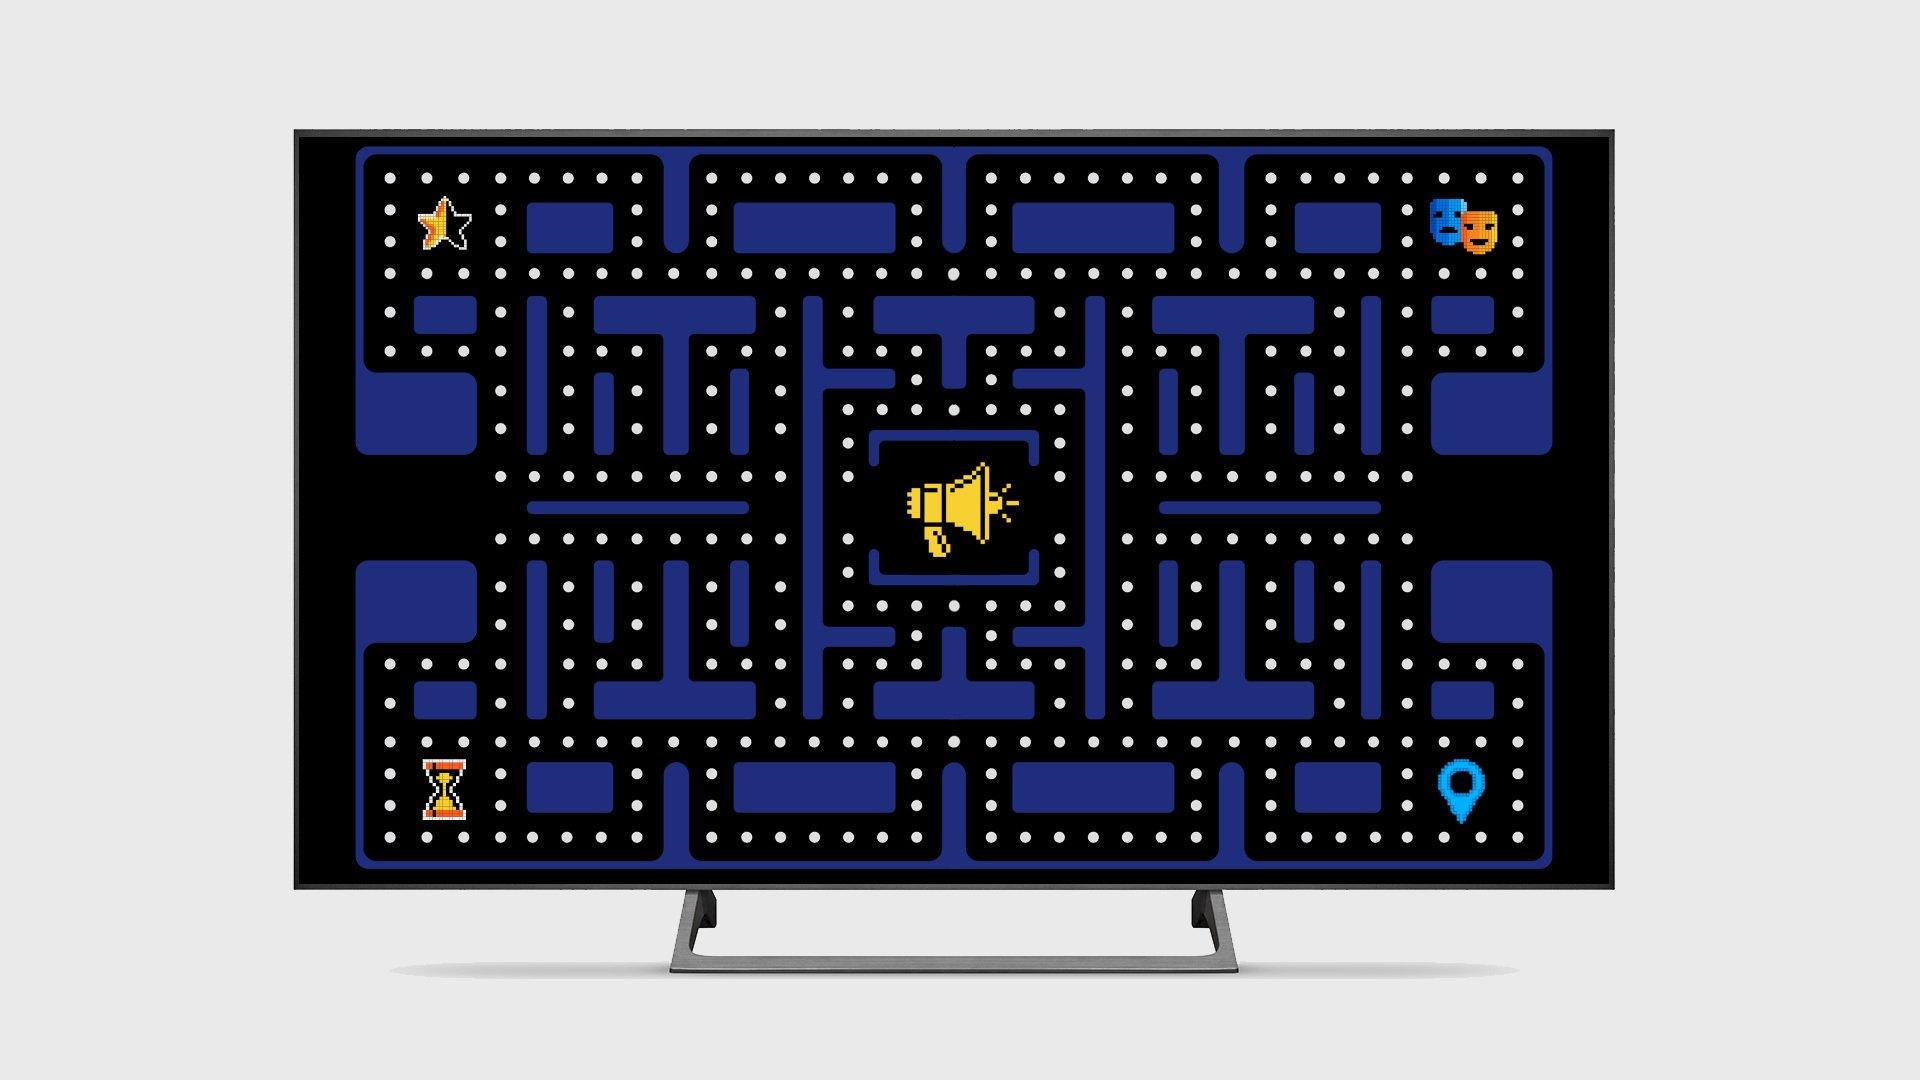 Pacman like game on a TV with a megaphone in the middle of the maze